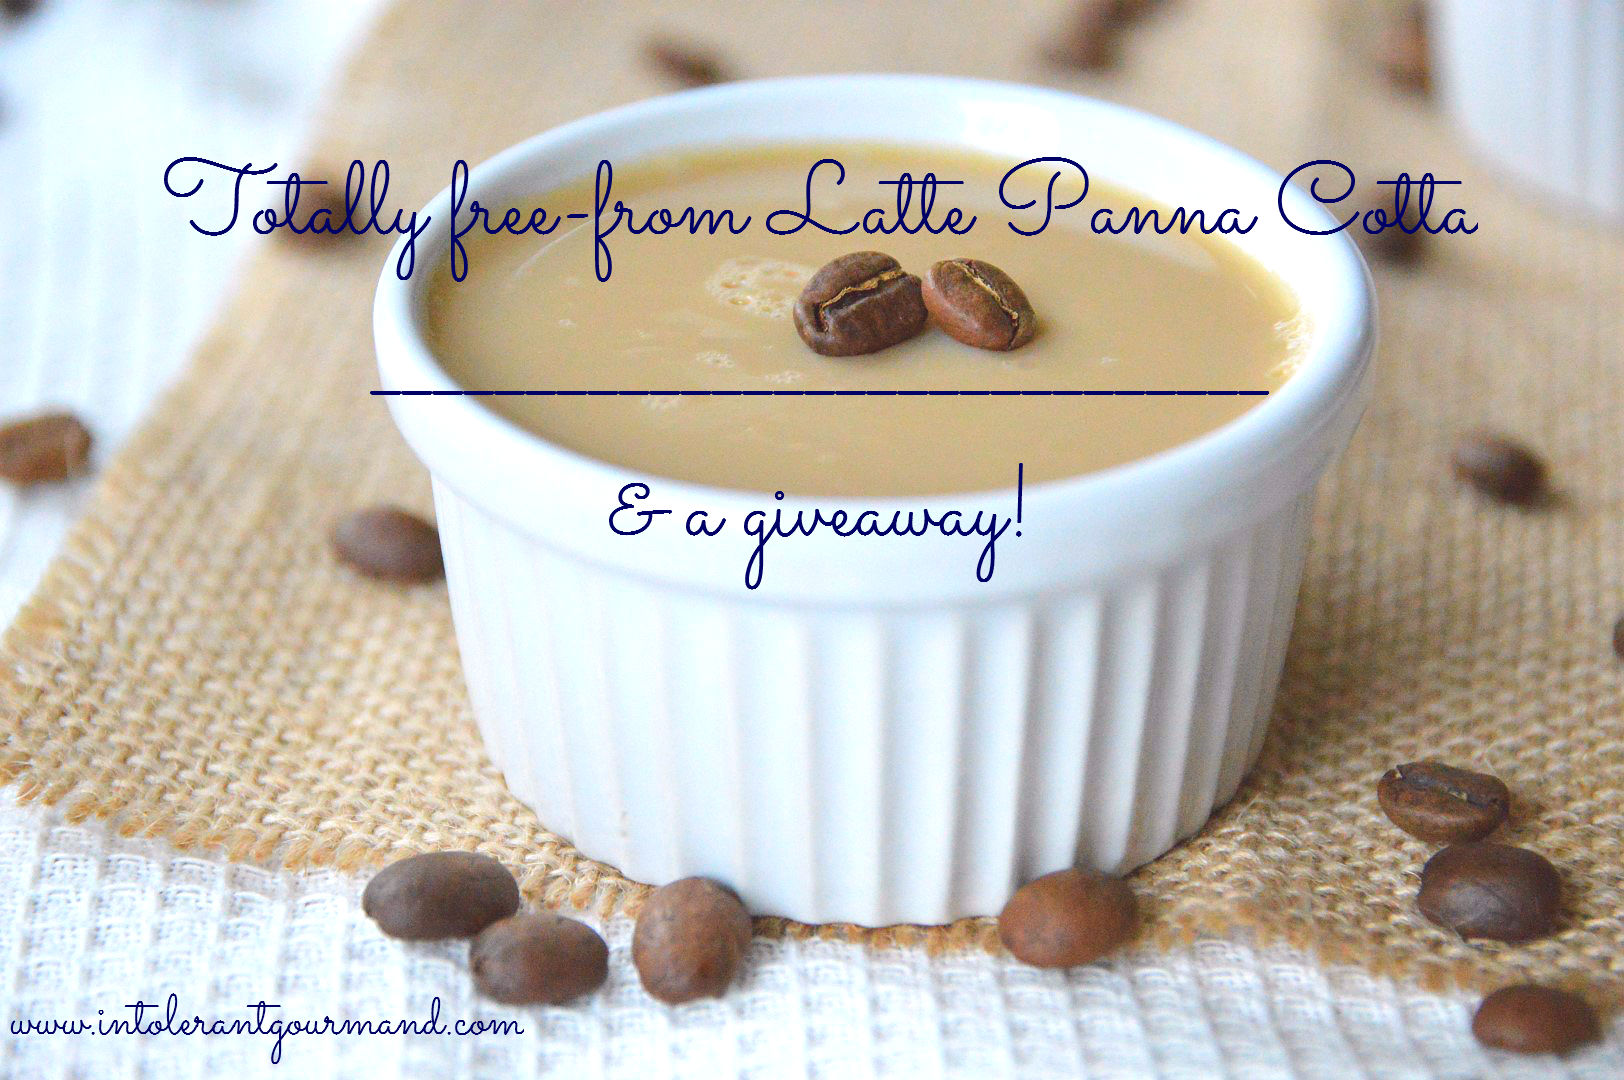 Totally free from Latte Panna Cotta